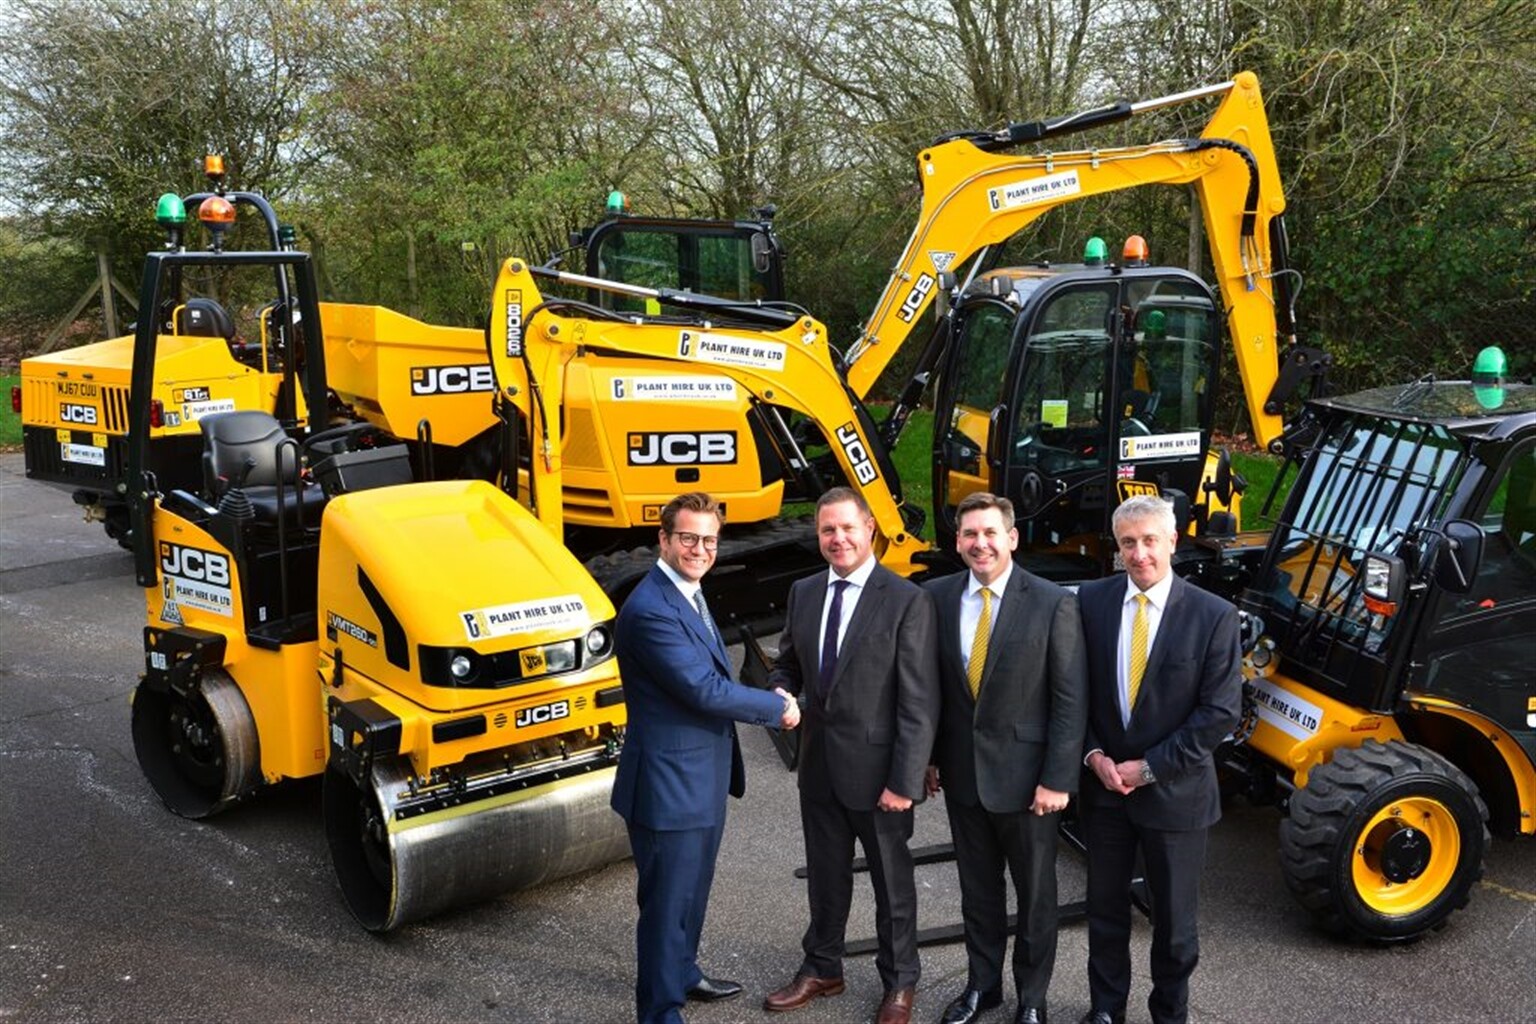 PLANT HIRE UK GEARS UP FOR GROWTH WITH 25 MILLION ORDER